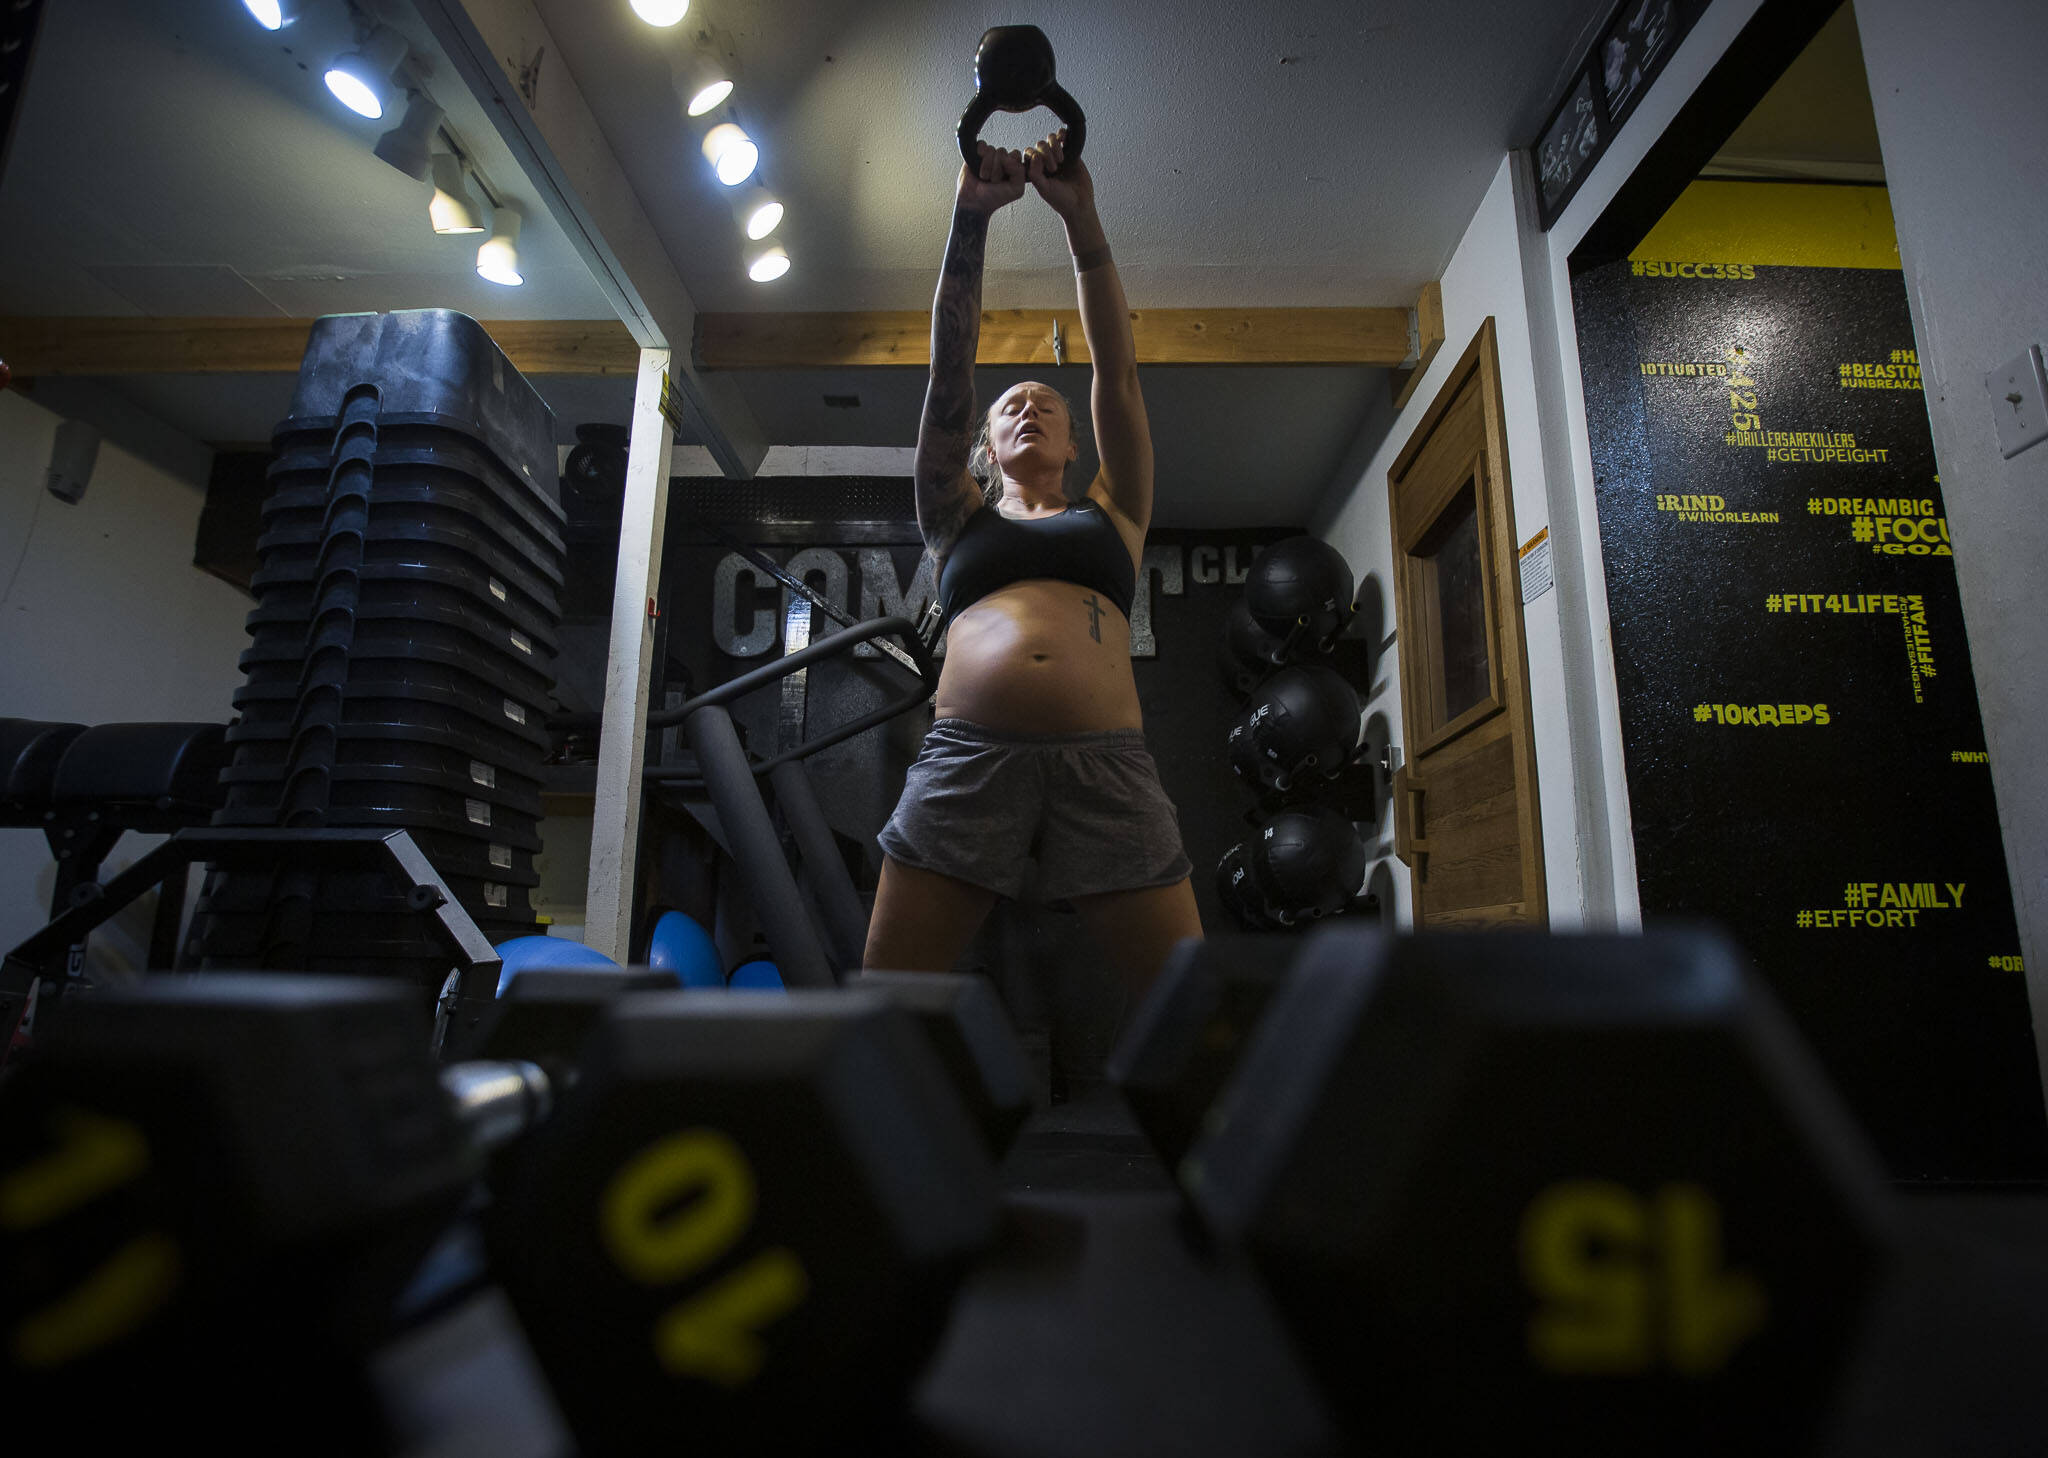 Miranda Granger works through one of the workout routines customized for her by pregnancy coach Brianna Battles at Charlie’s Combat Club on Thursday, May 13, 2022, in Everett, Washington. (Olivia Vanni / The Herald)